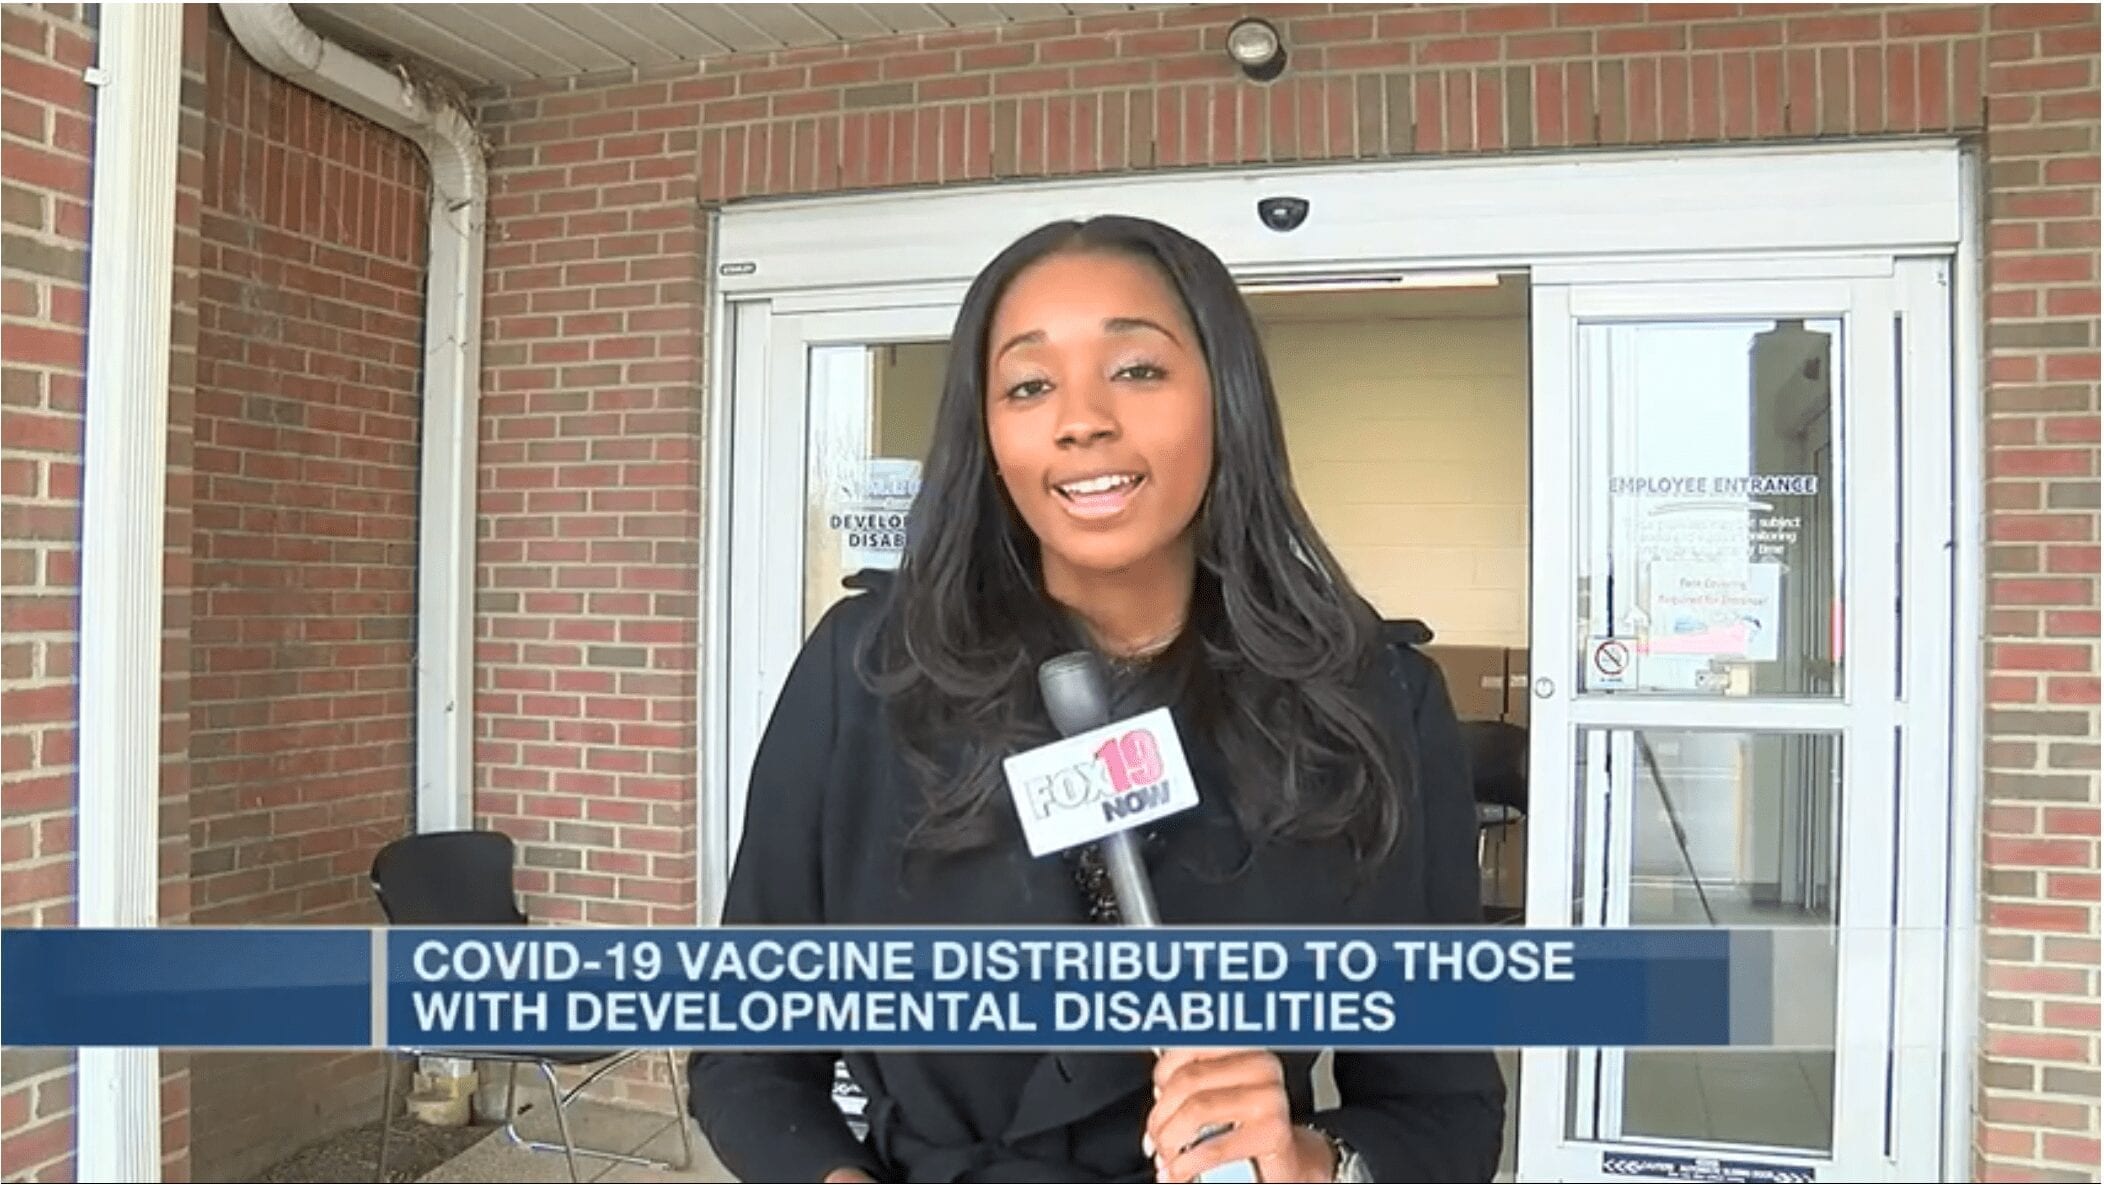 A woman with a FOX19 microphone stands in front of a building. A caption reads: COVID-19 vaccine distributed to those with developmental disabilities.